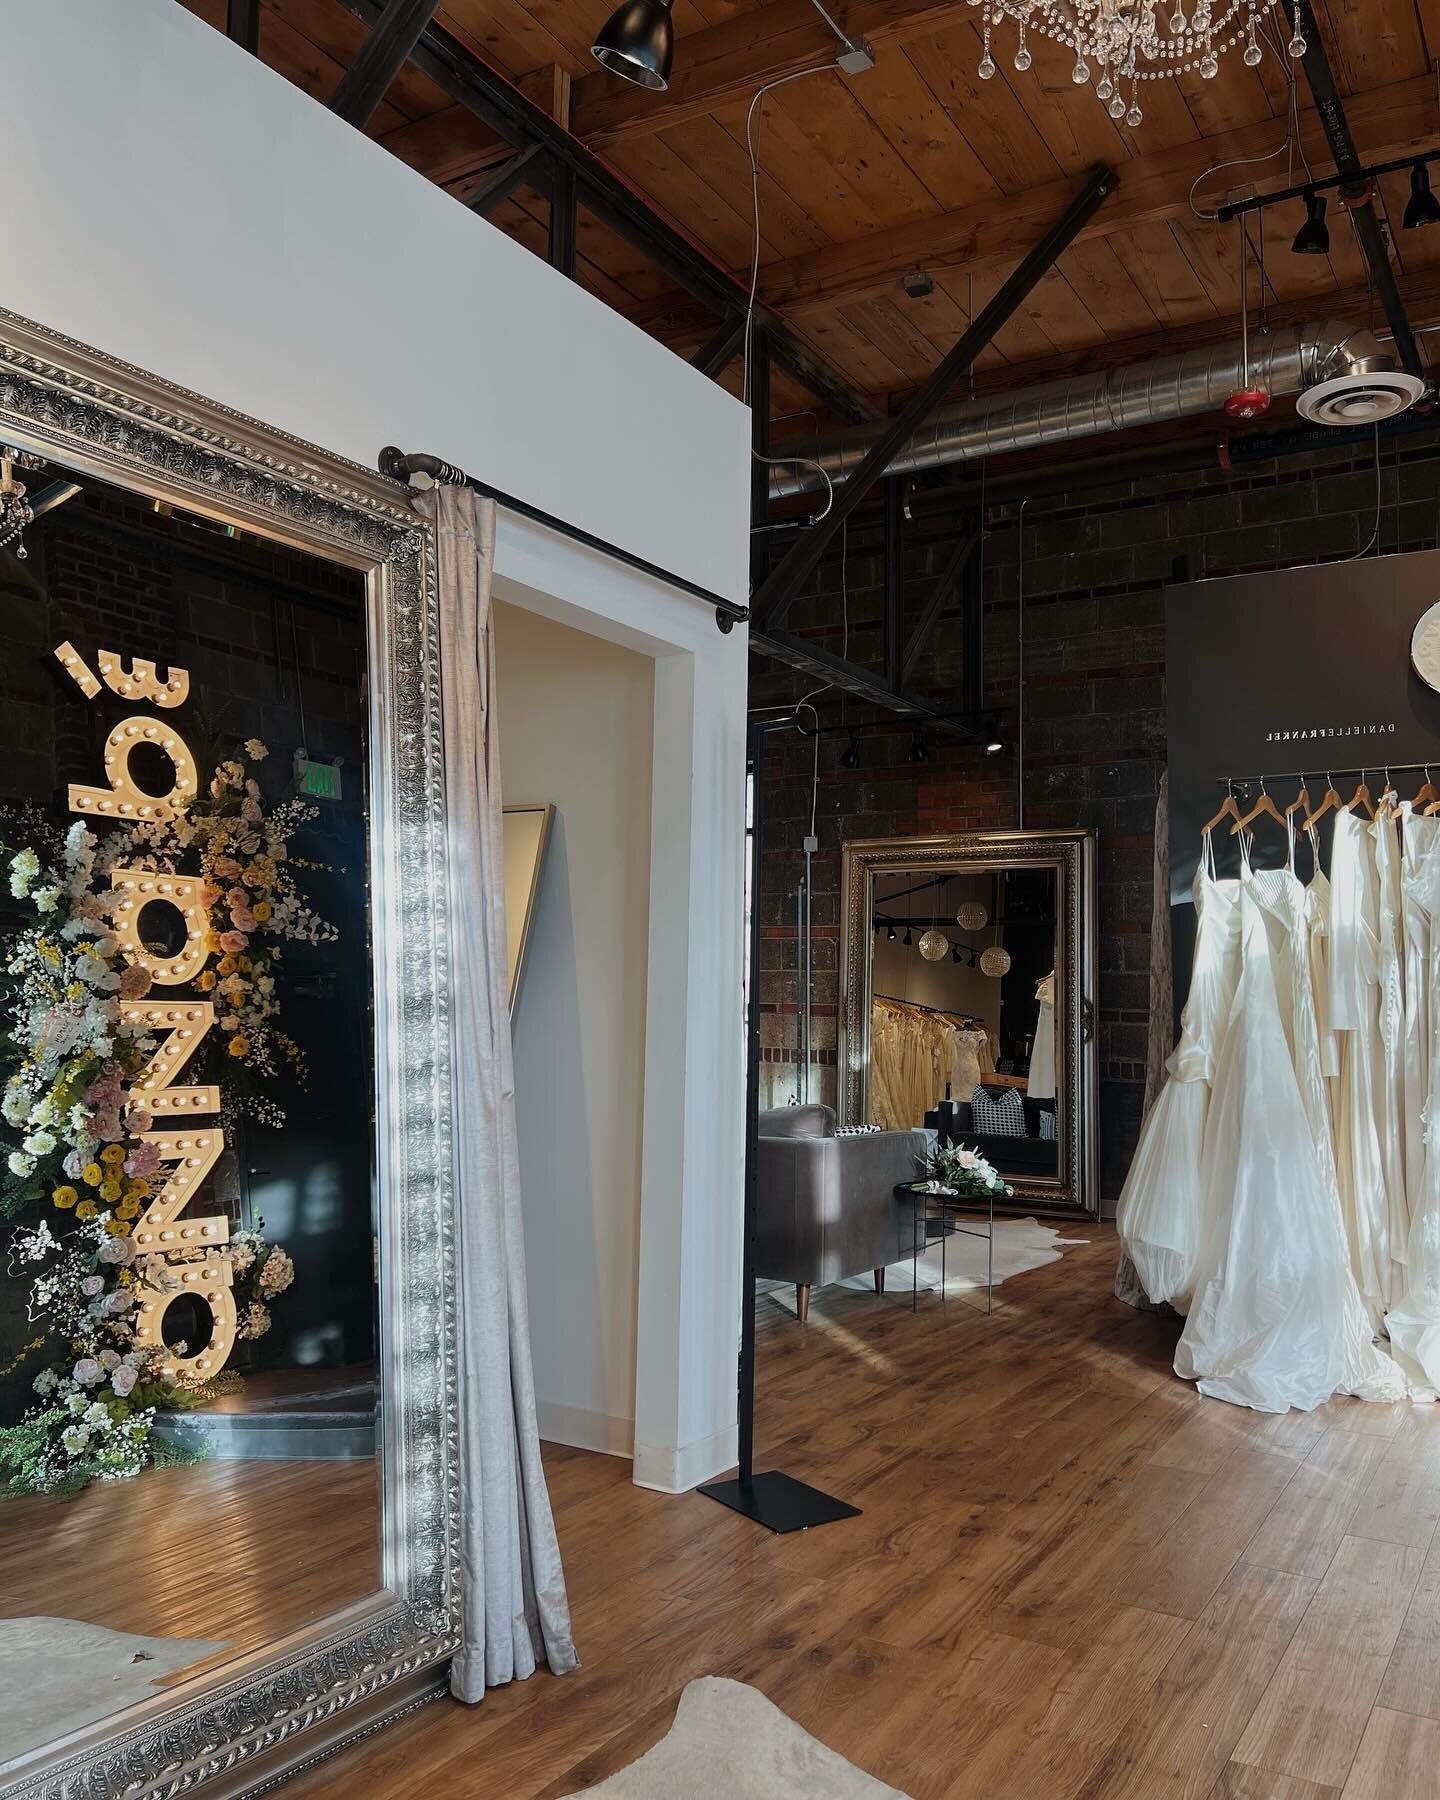 we have trunk shows galore this coming weekend in #colorado so by popular demand, we&rsquo;re opening up a rare SUNDAY to accommodate all our #annabebrides! 

appointments are limited + going fast. head online to book your sunday bridal appointment f